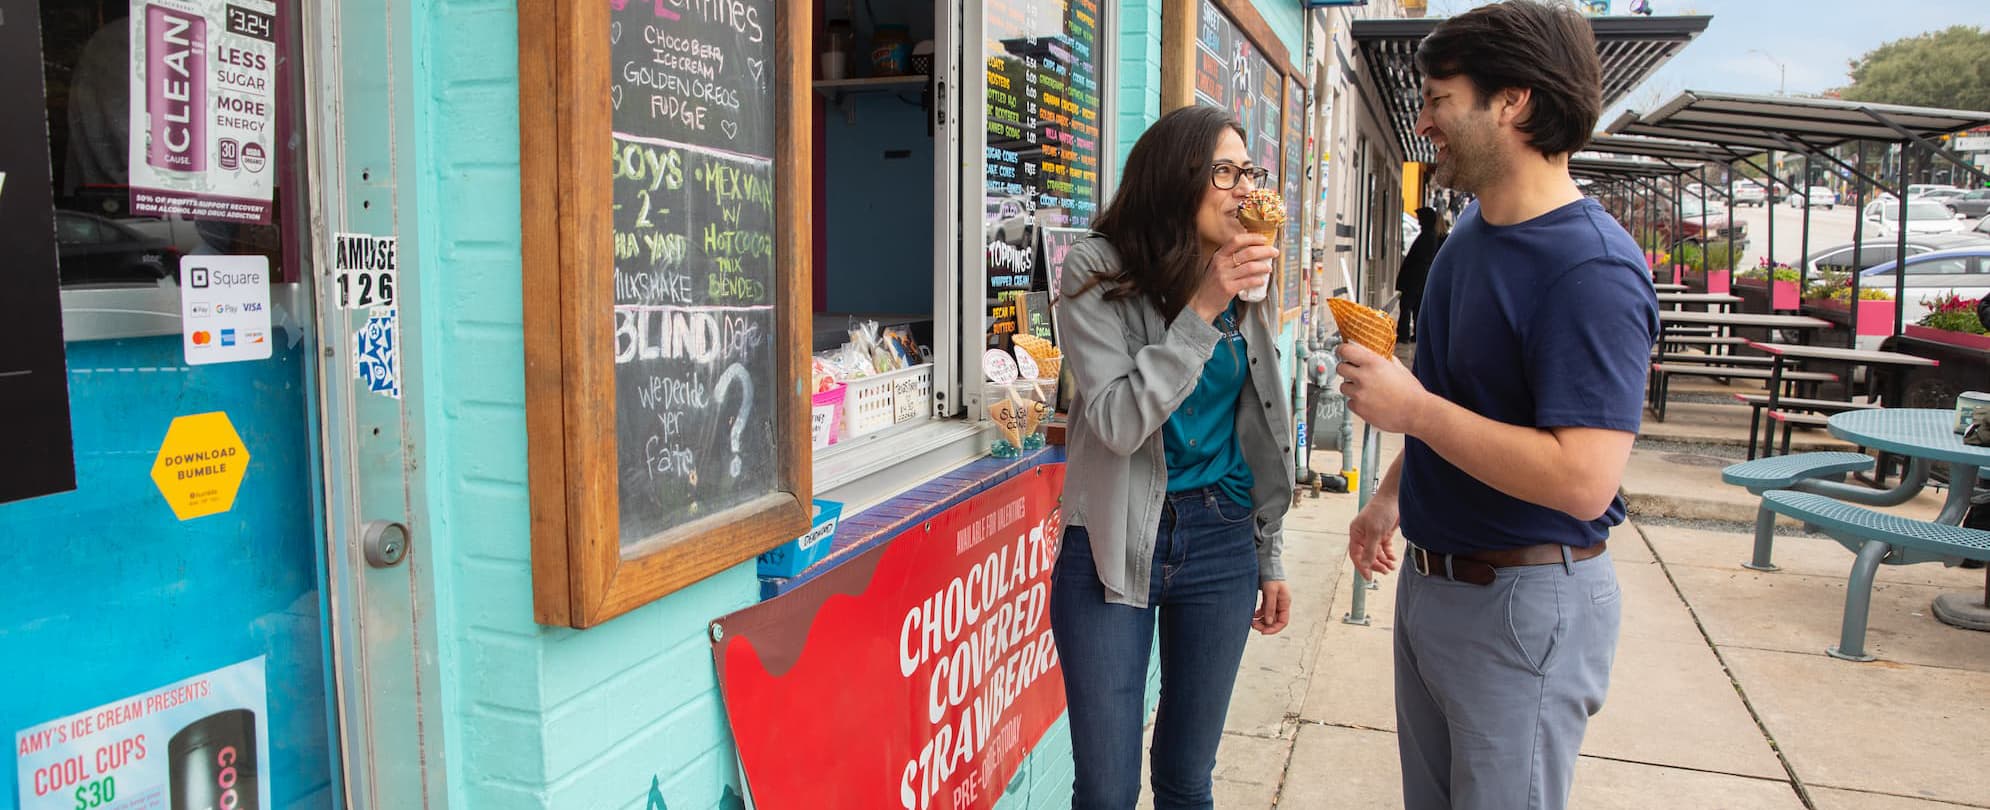 A smiling man and woman enjoy ice cream cones while standing in front of the store window.